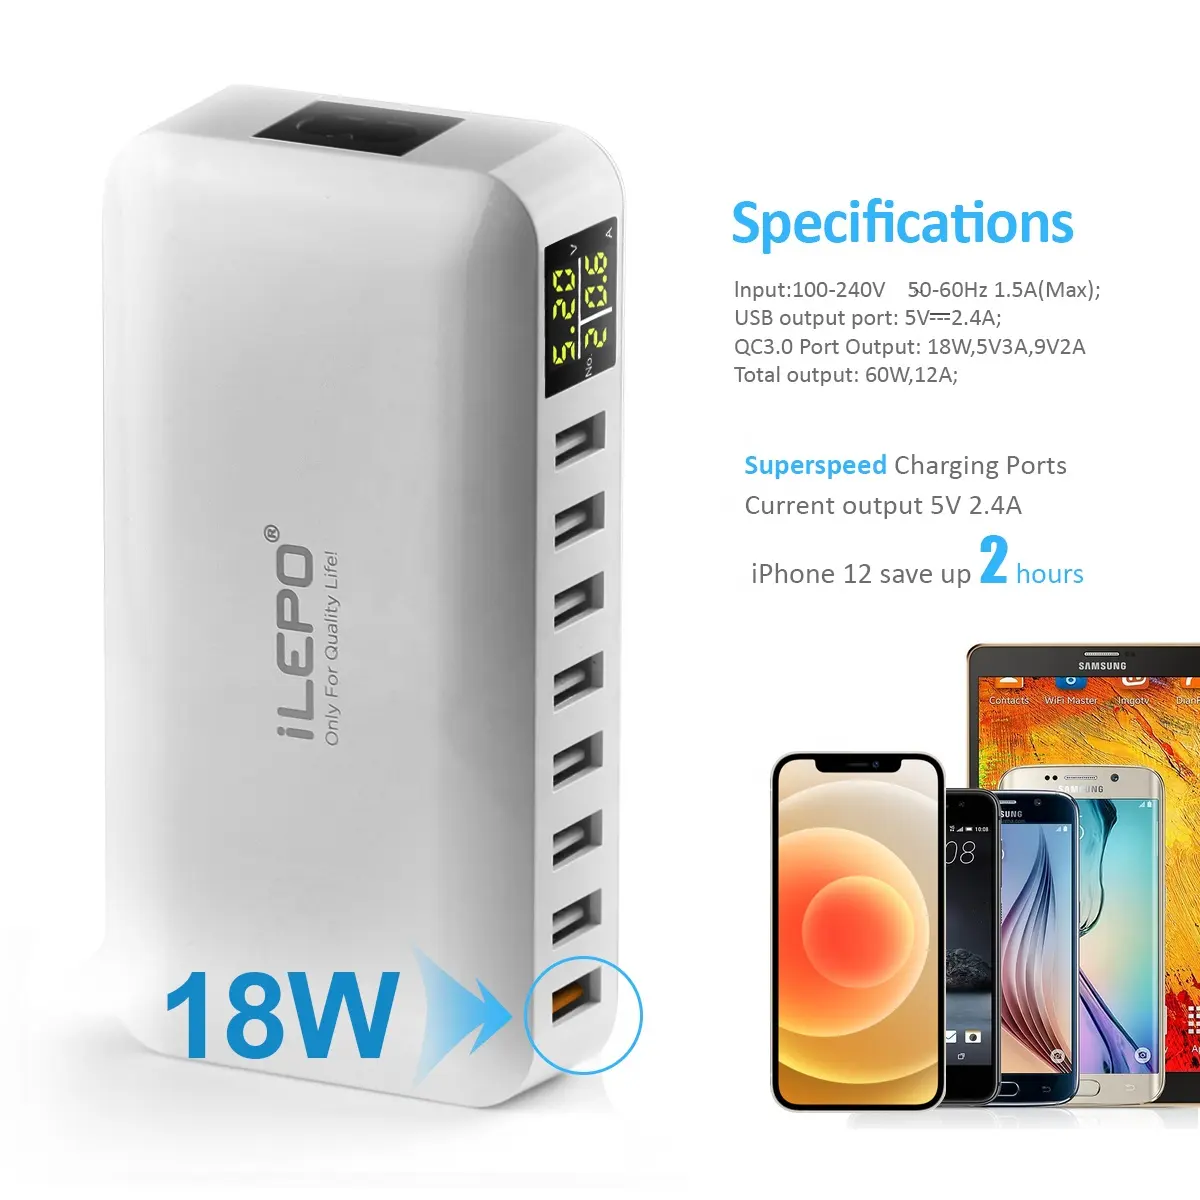 60W ilepo i6 CE FCC Rohs PSE multiple charging station type c multifunction usb fast wall mobile portable phone chargers